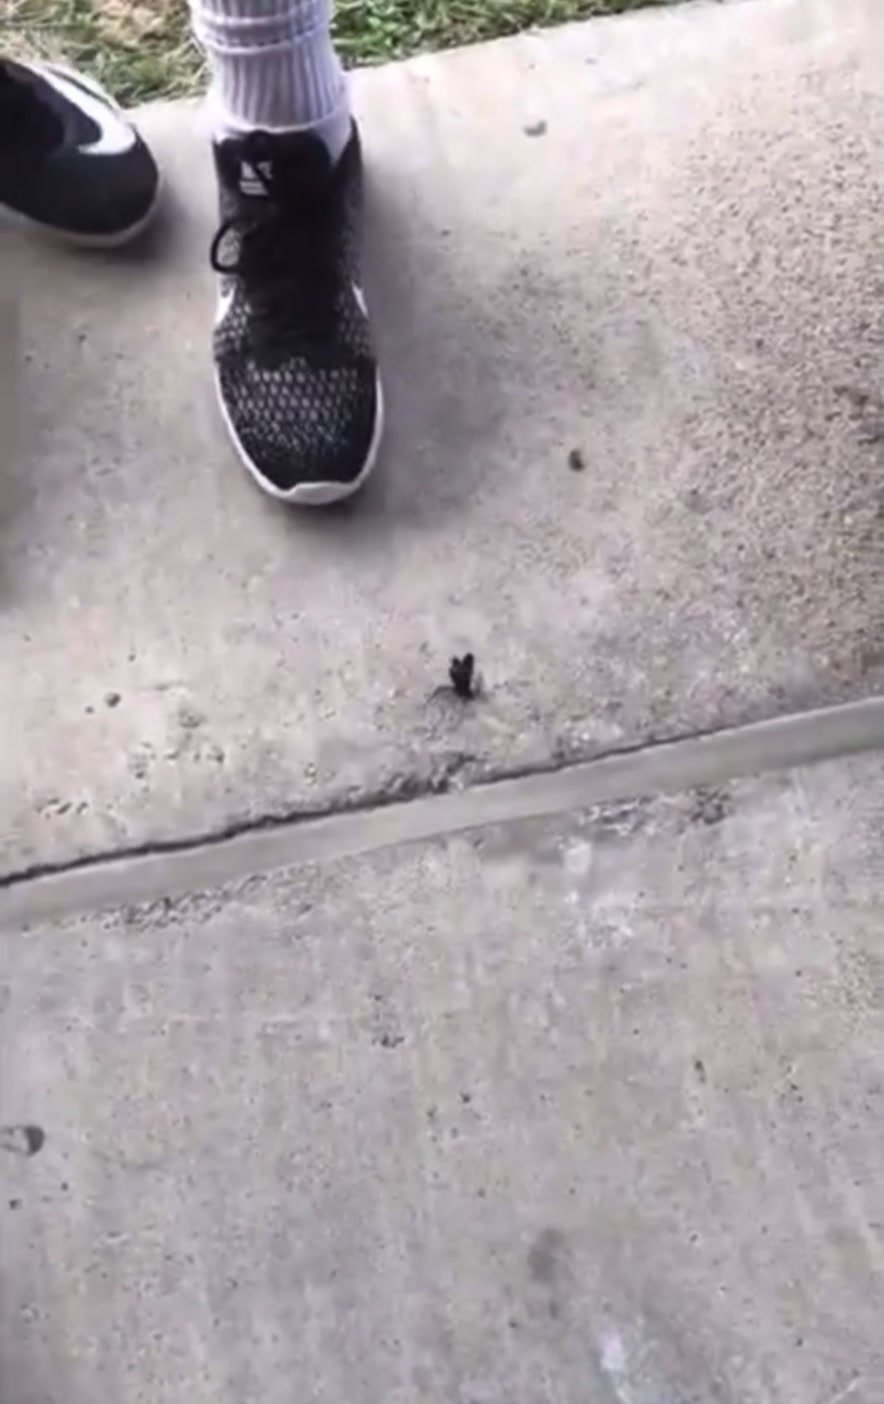 Boy crushes wasp into the ground!